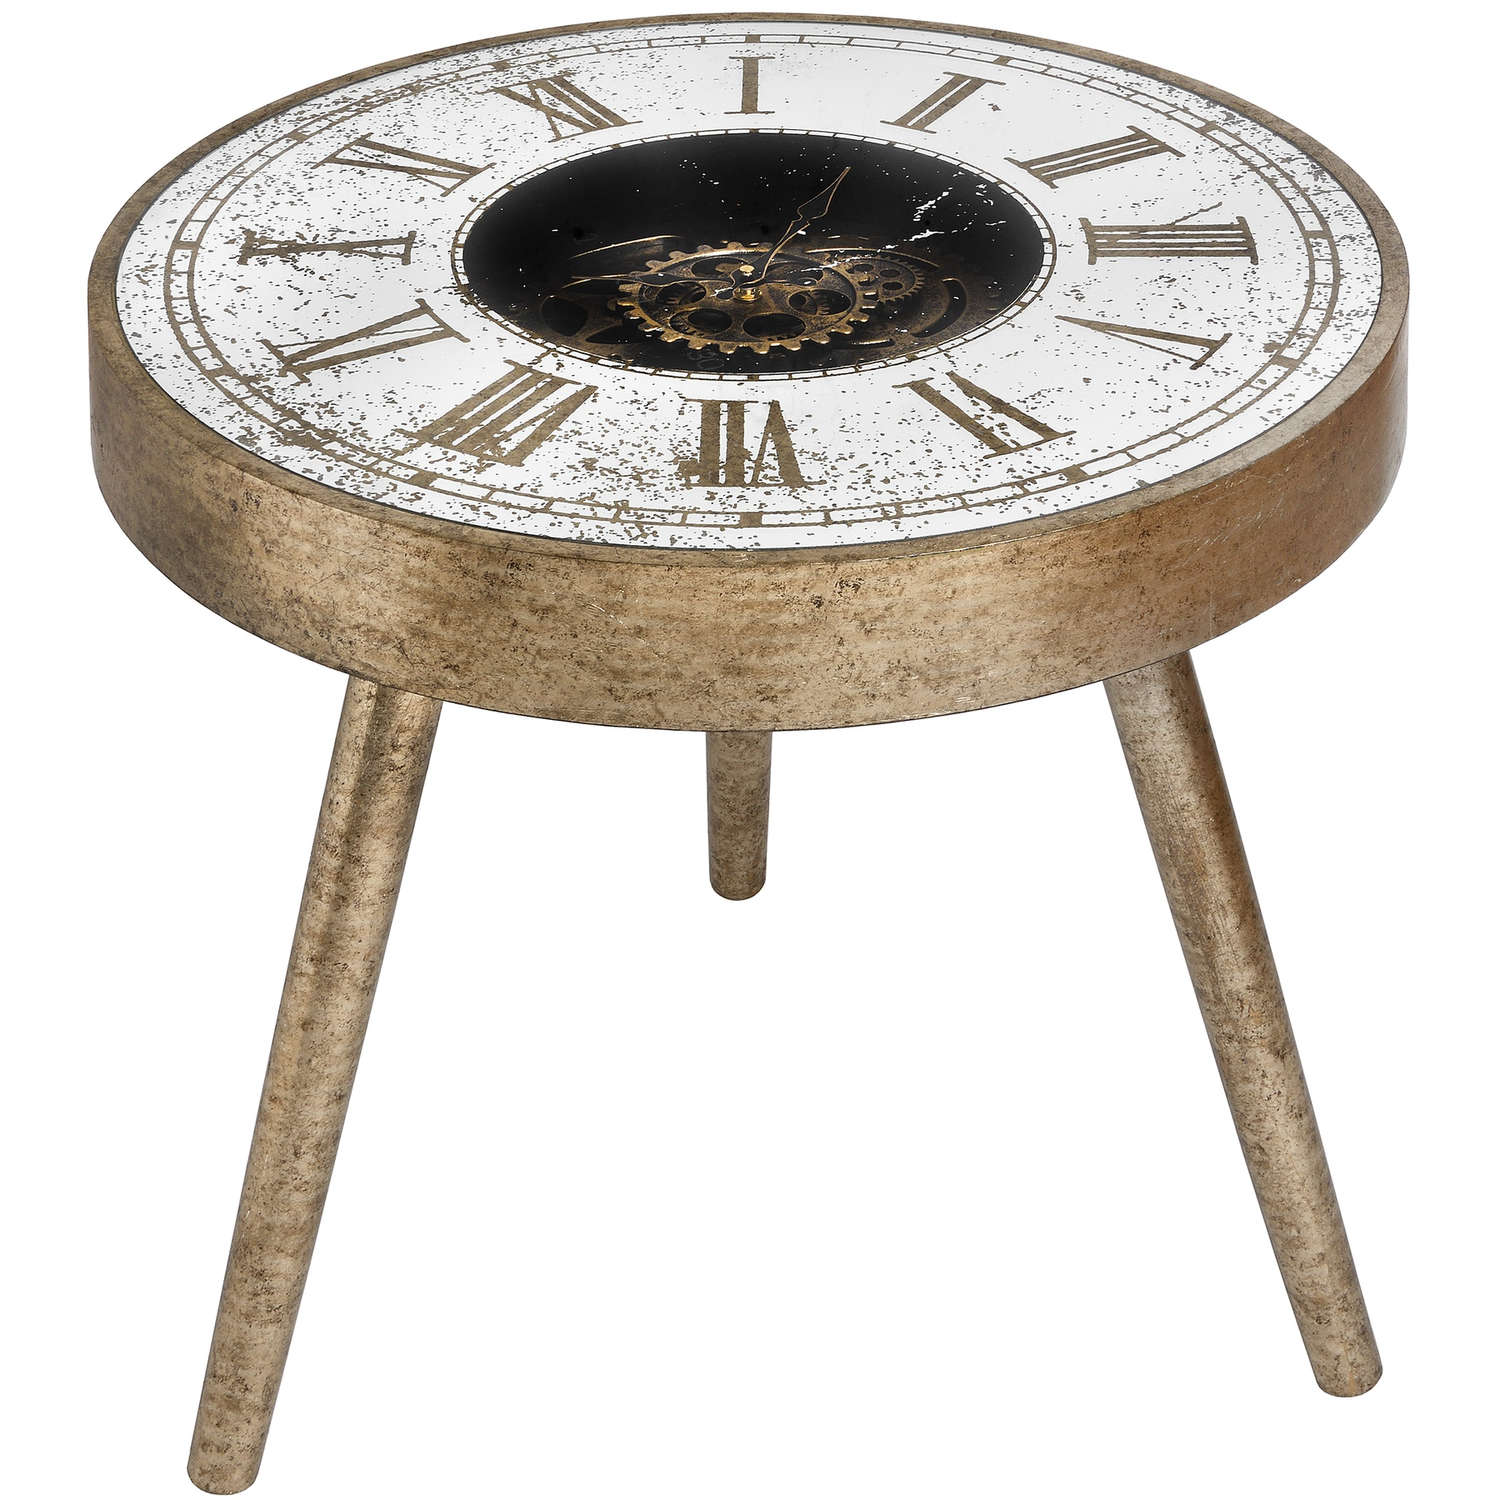 Mirrored Round Framed Clock Table With Moving Mechanism - Image 1